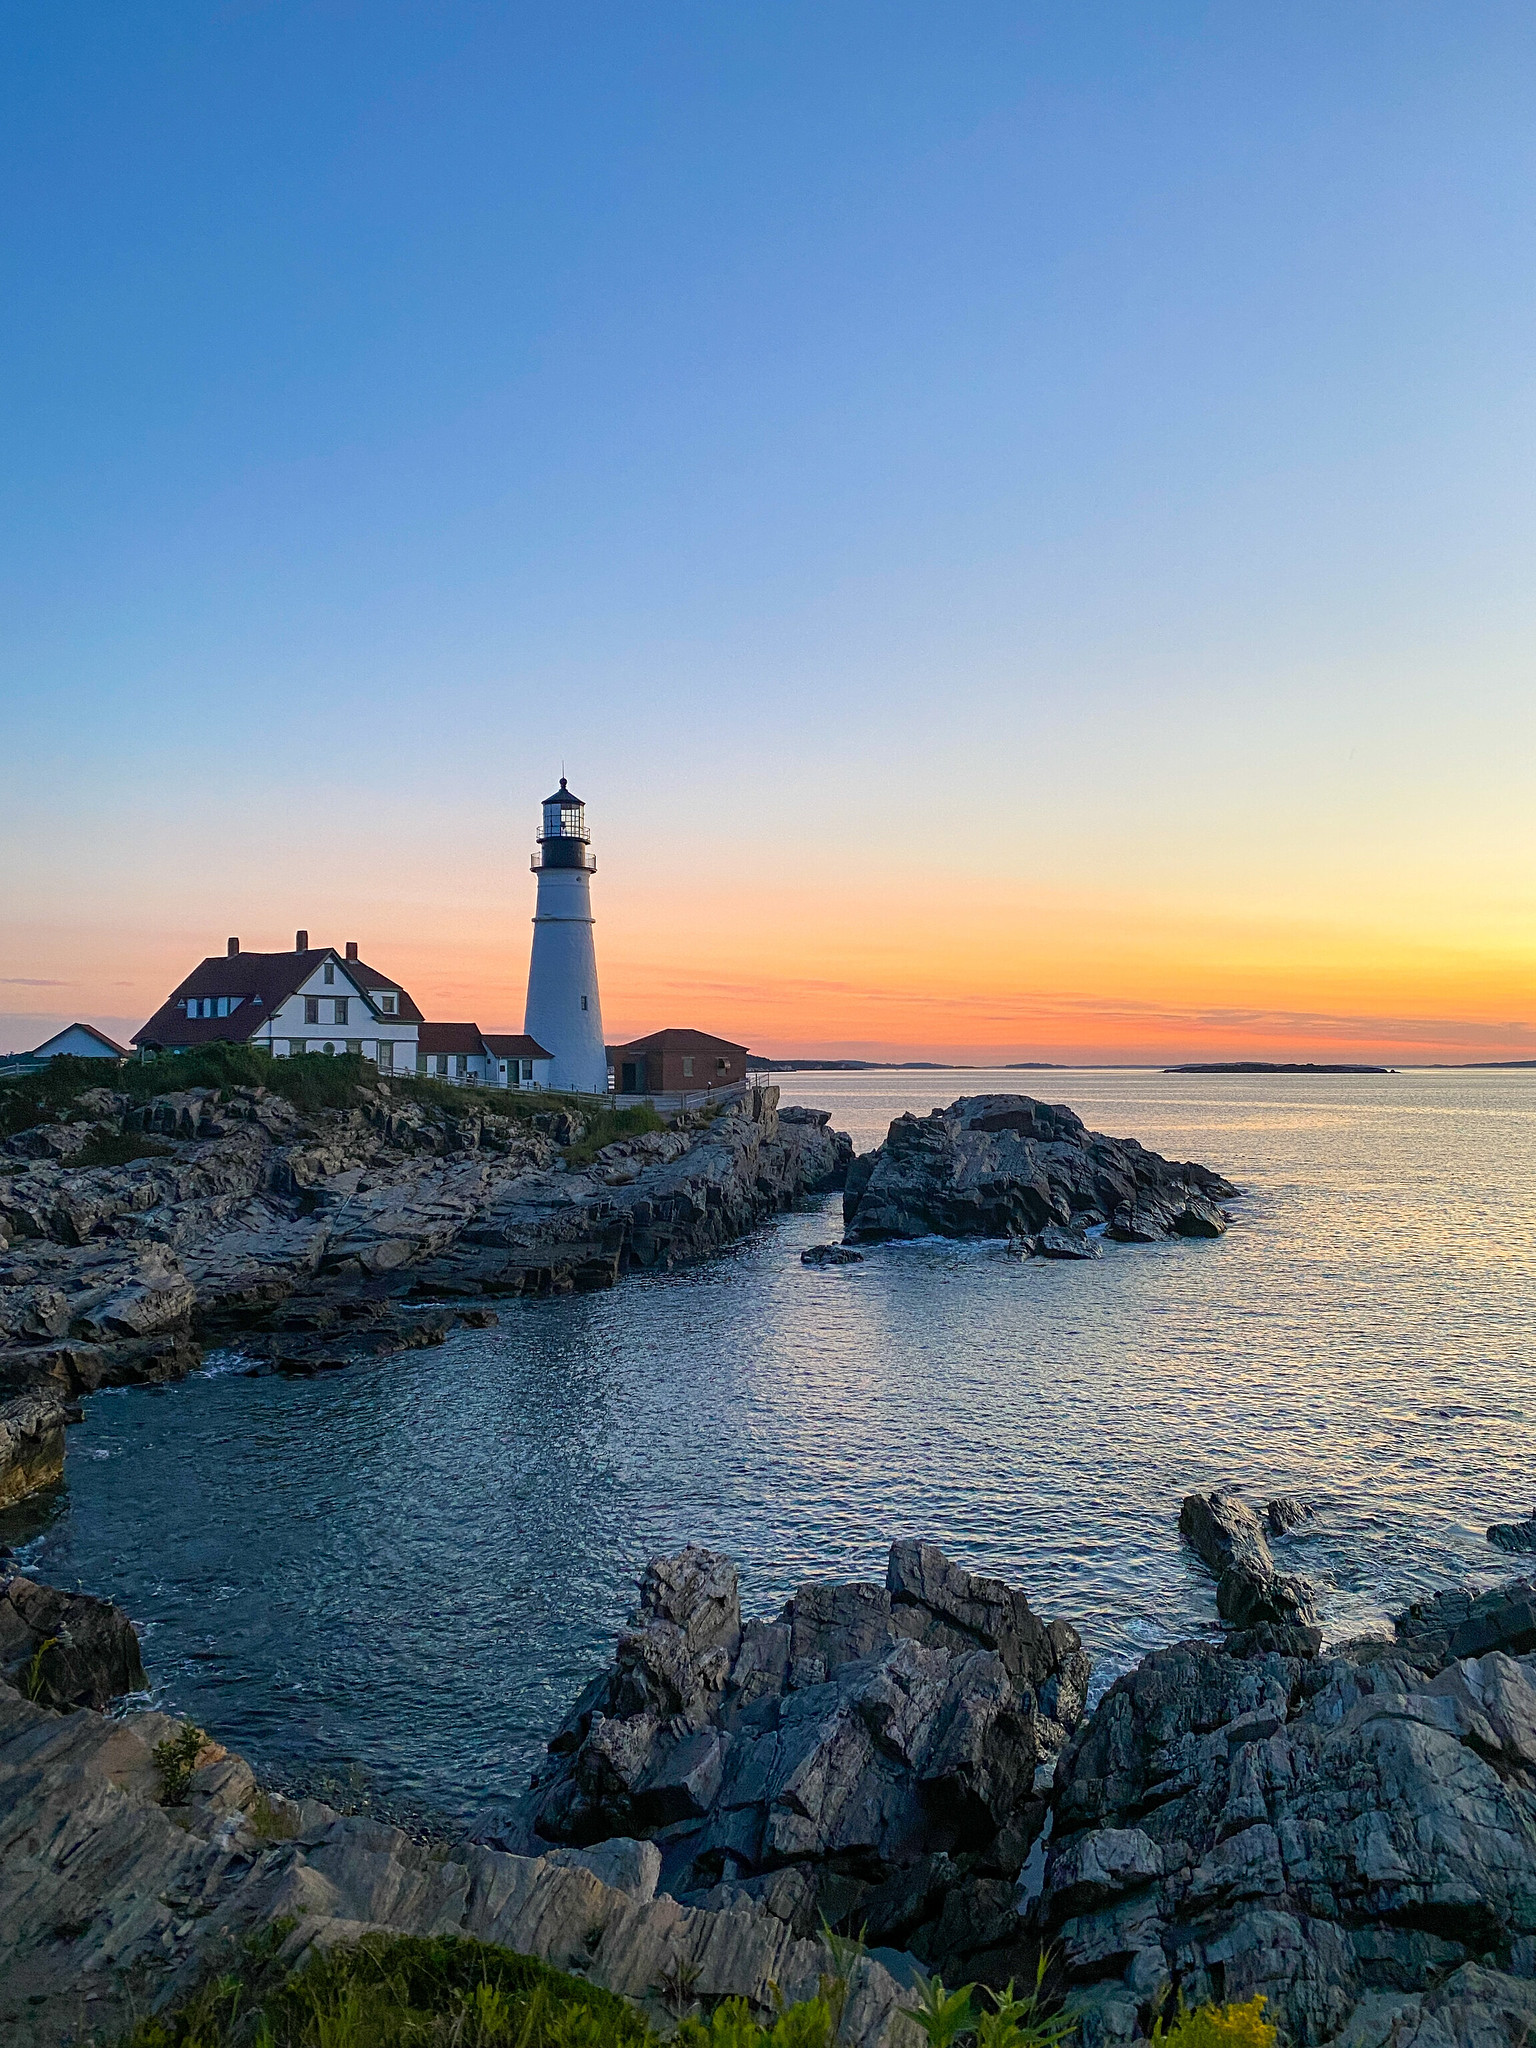 Sunrise at Portland Head Light | Fort Willaims Park | Best Things to Do in Portland Maine | 2 Days in Portland Maine | 48 Hours in Portland Maine | The Perfect Weekend in Maine | Explore Portland, ME | Weekend in Portland, ME | Portland Travel Guide | Things to Do & Where to Stay | Top Things to do in Portland 